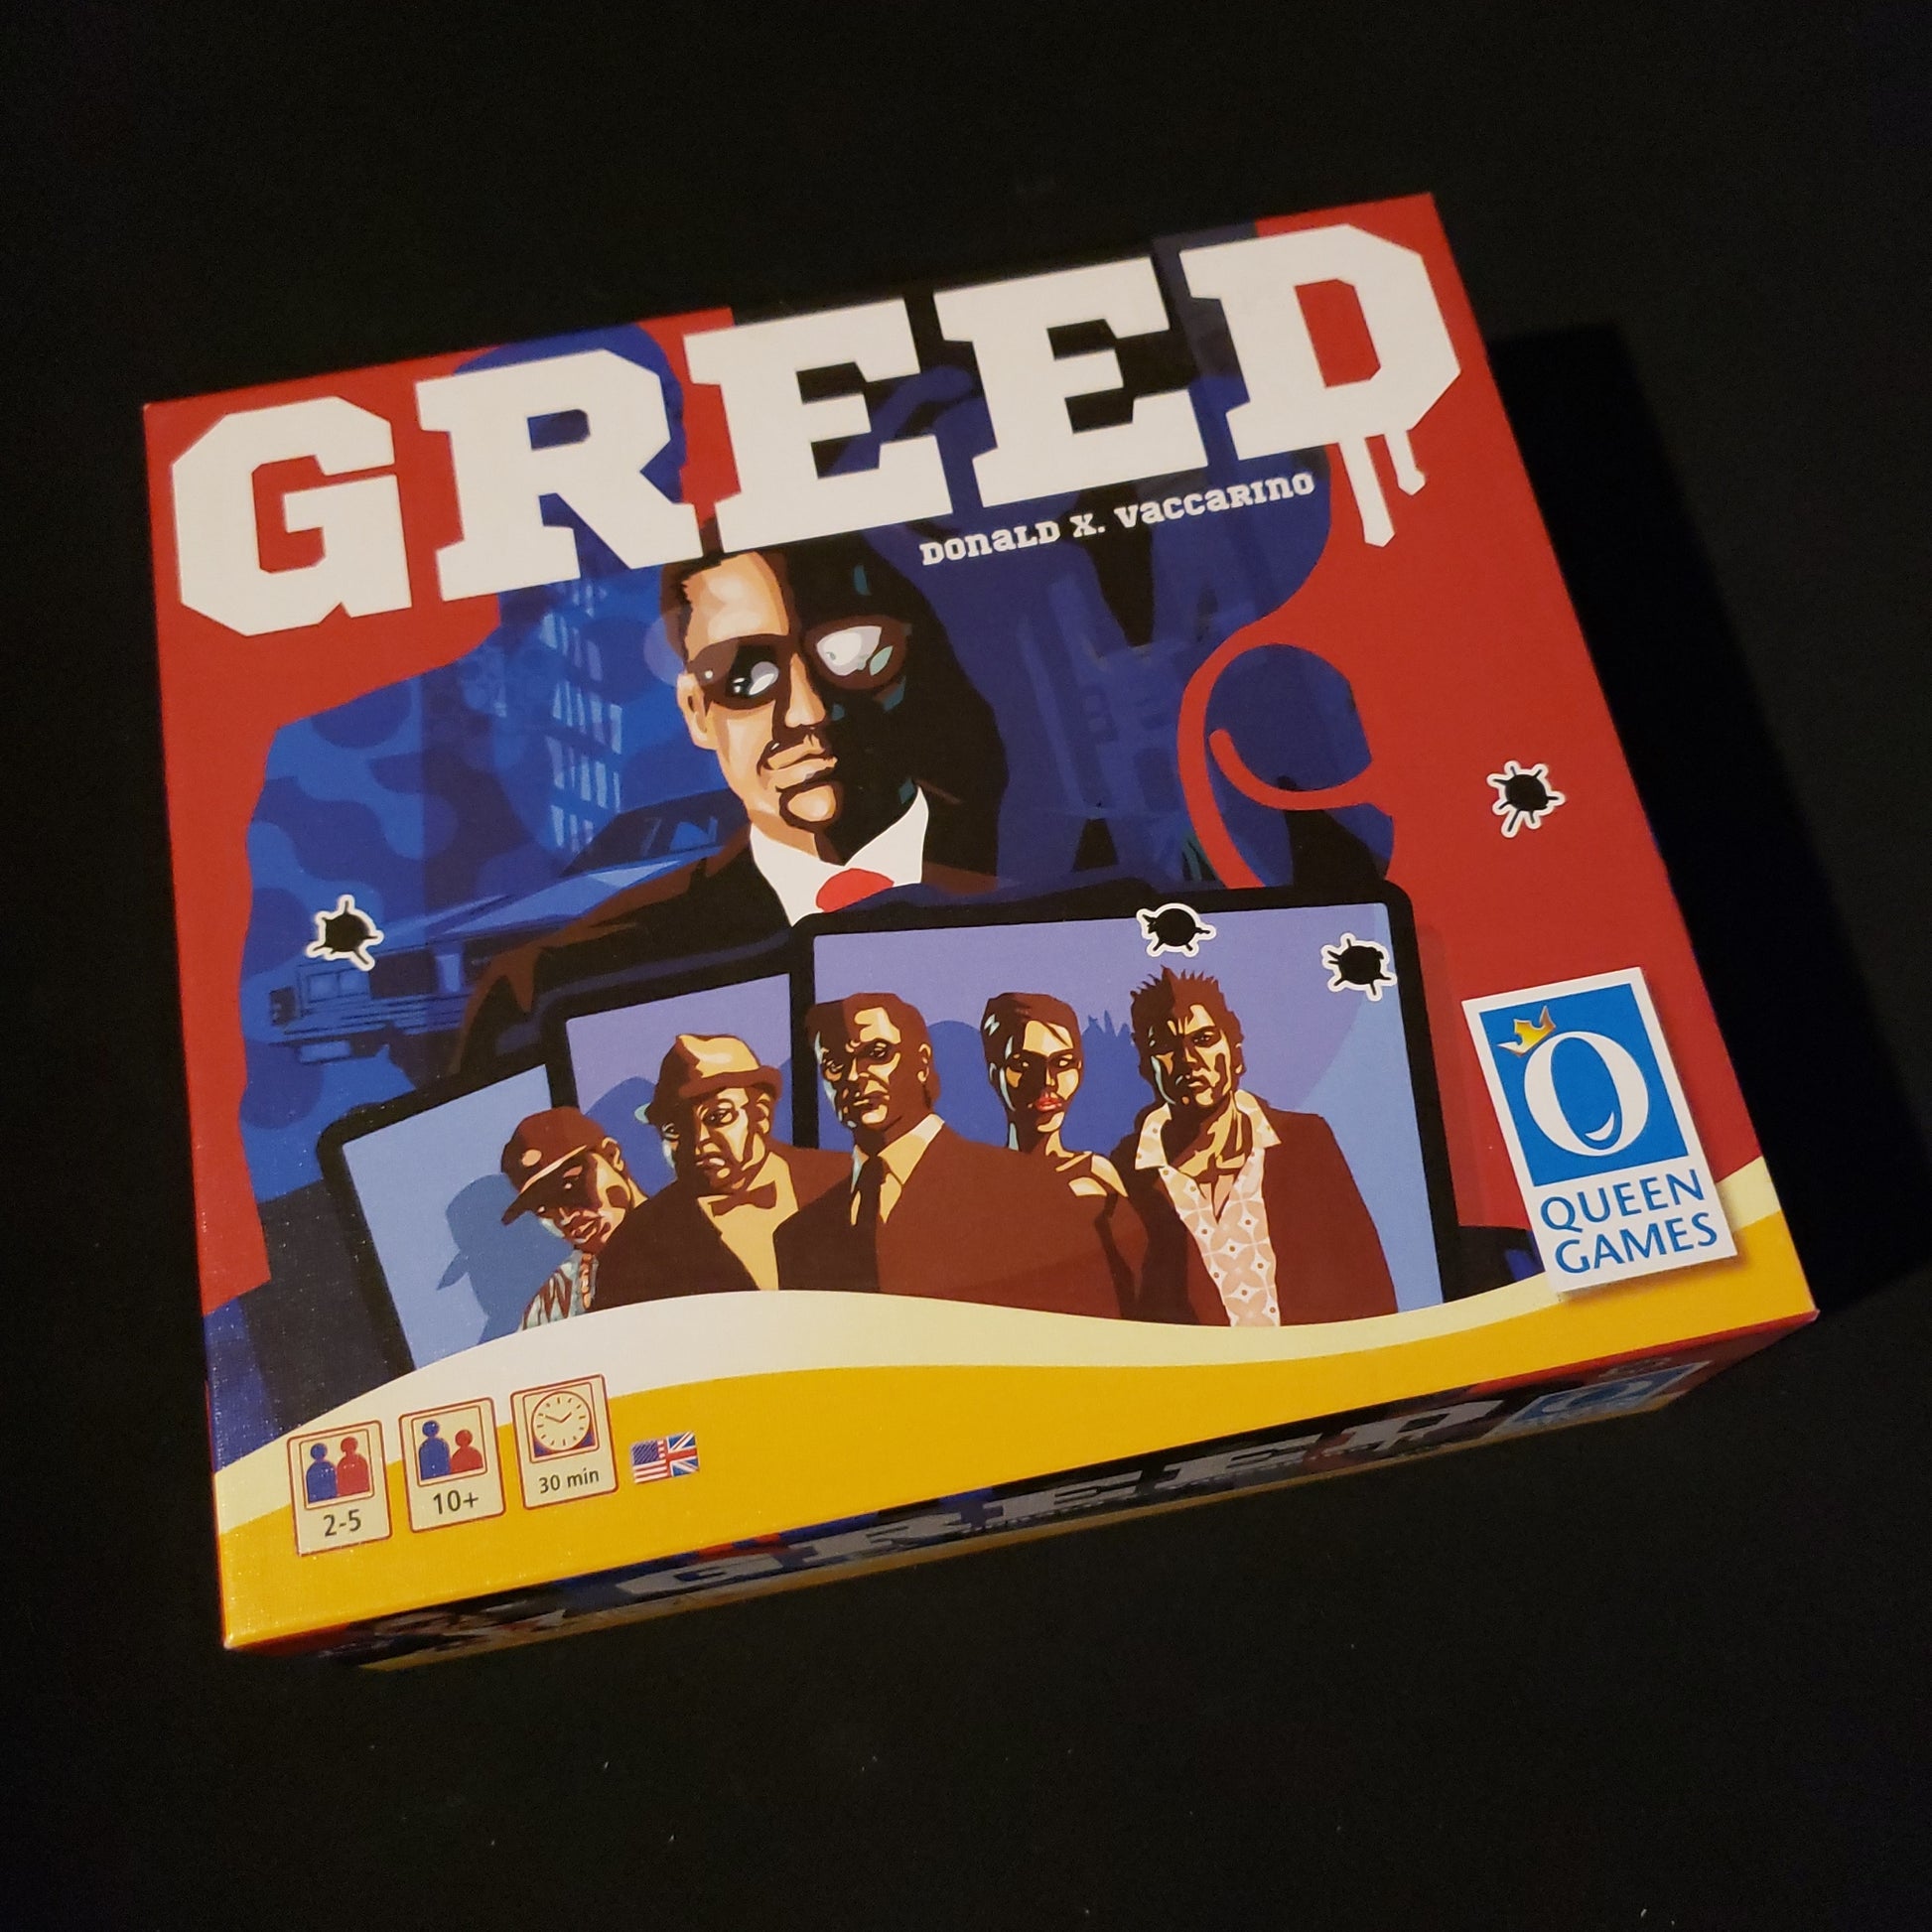 Image shows the front cover of the box of the Greed card game